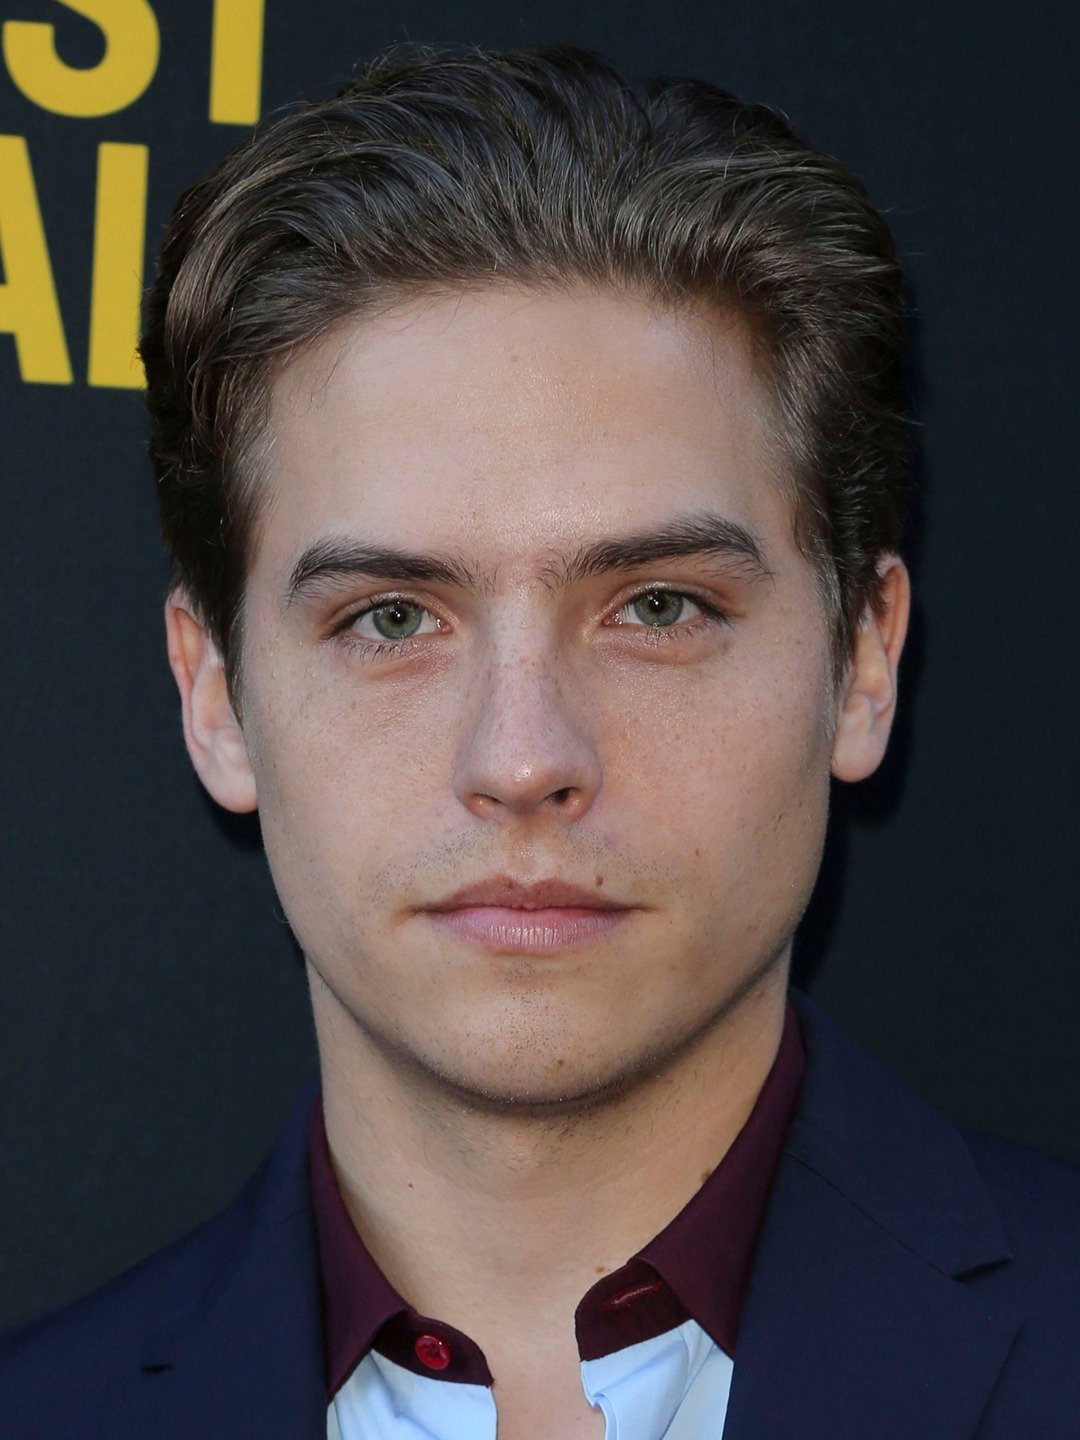 Dylan Sprouse - Actor